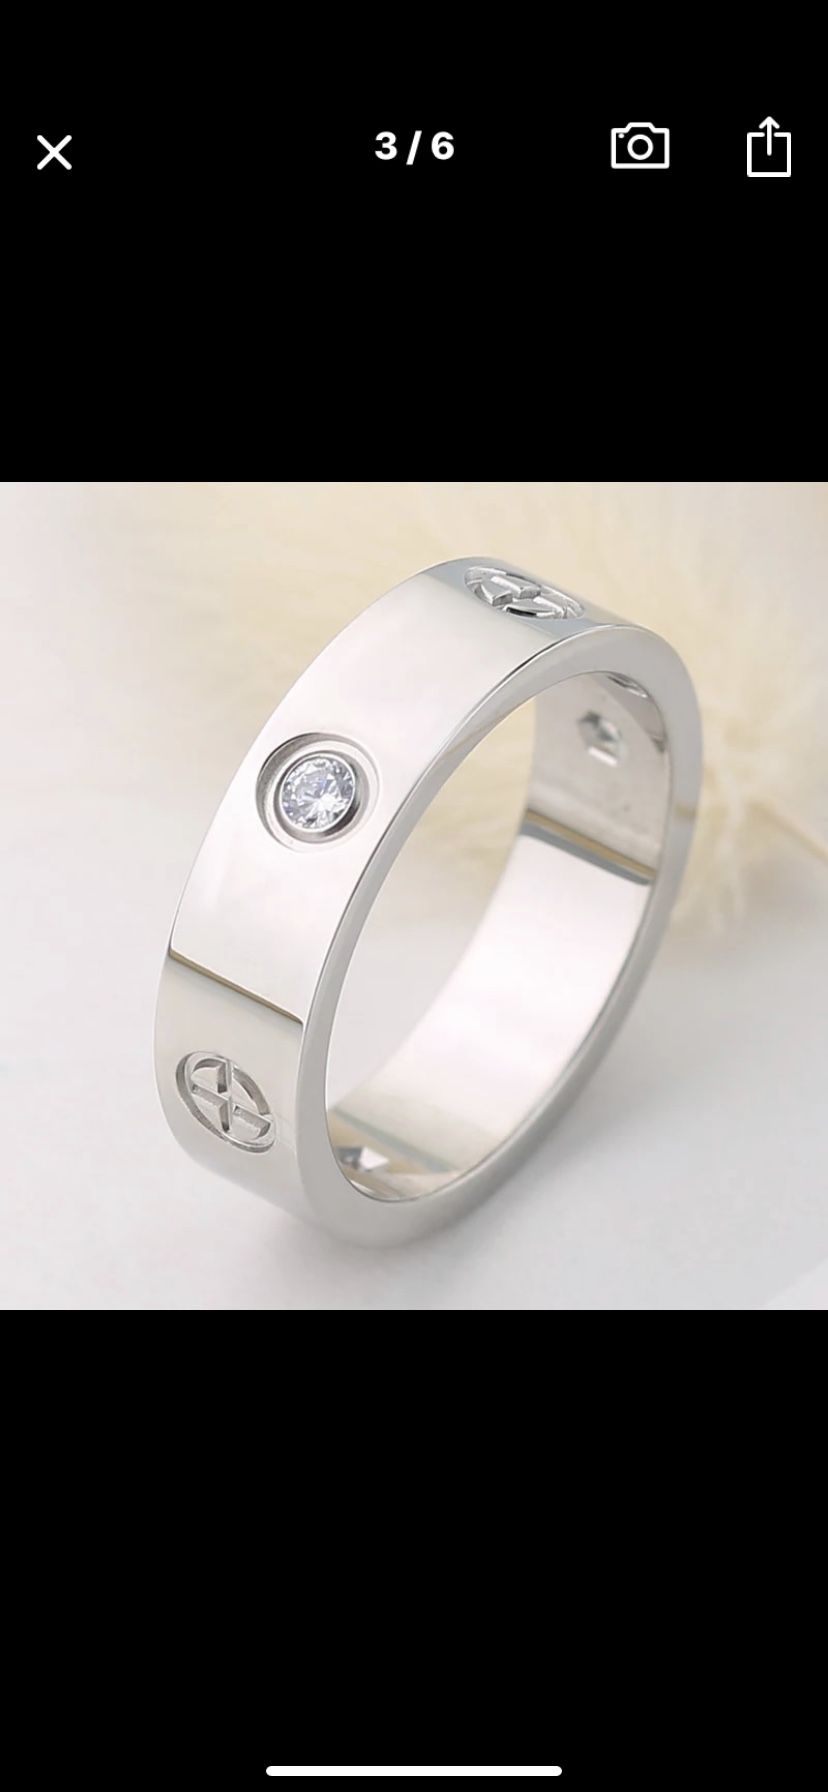 CATIER WEDDING BAND RING